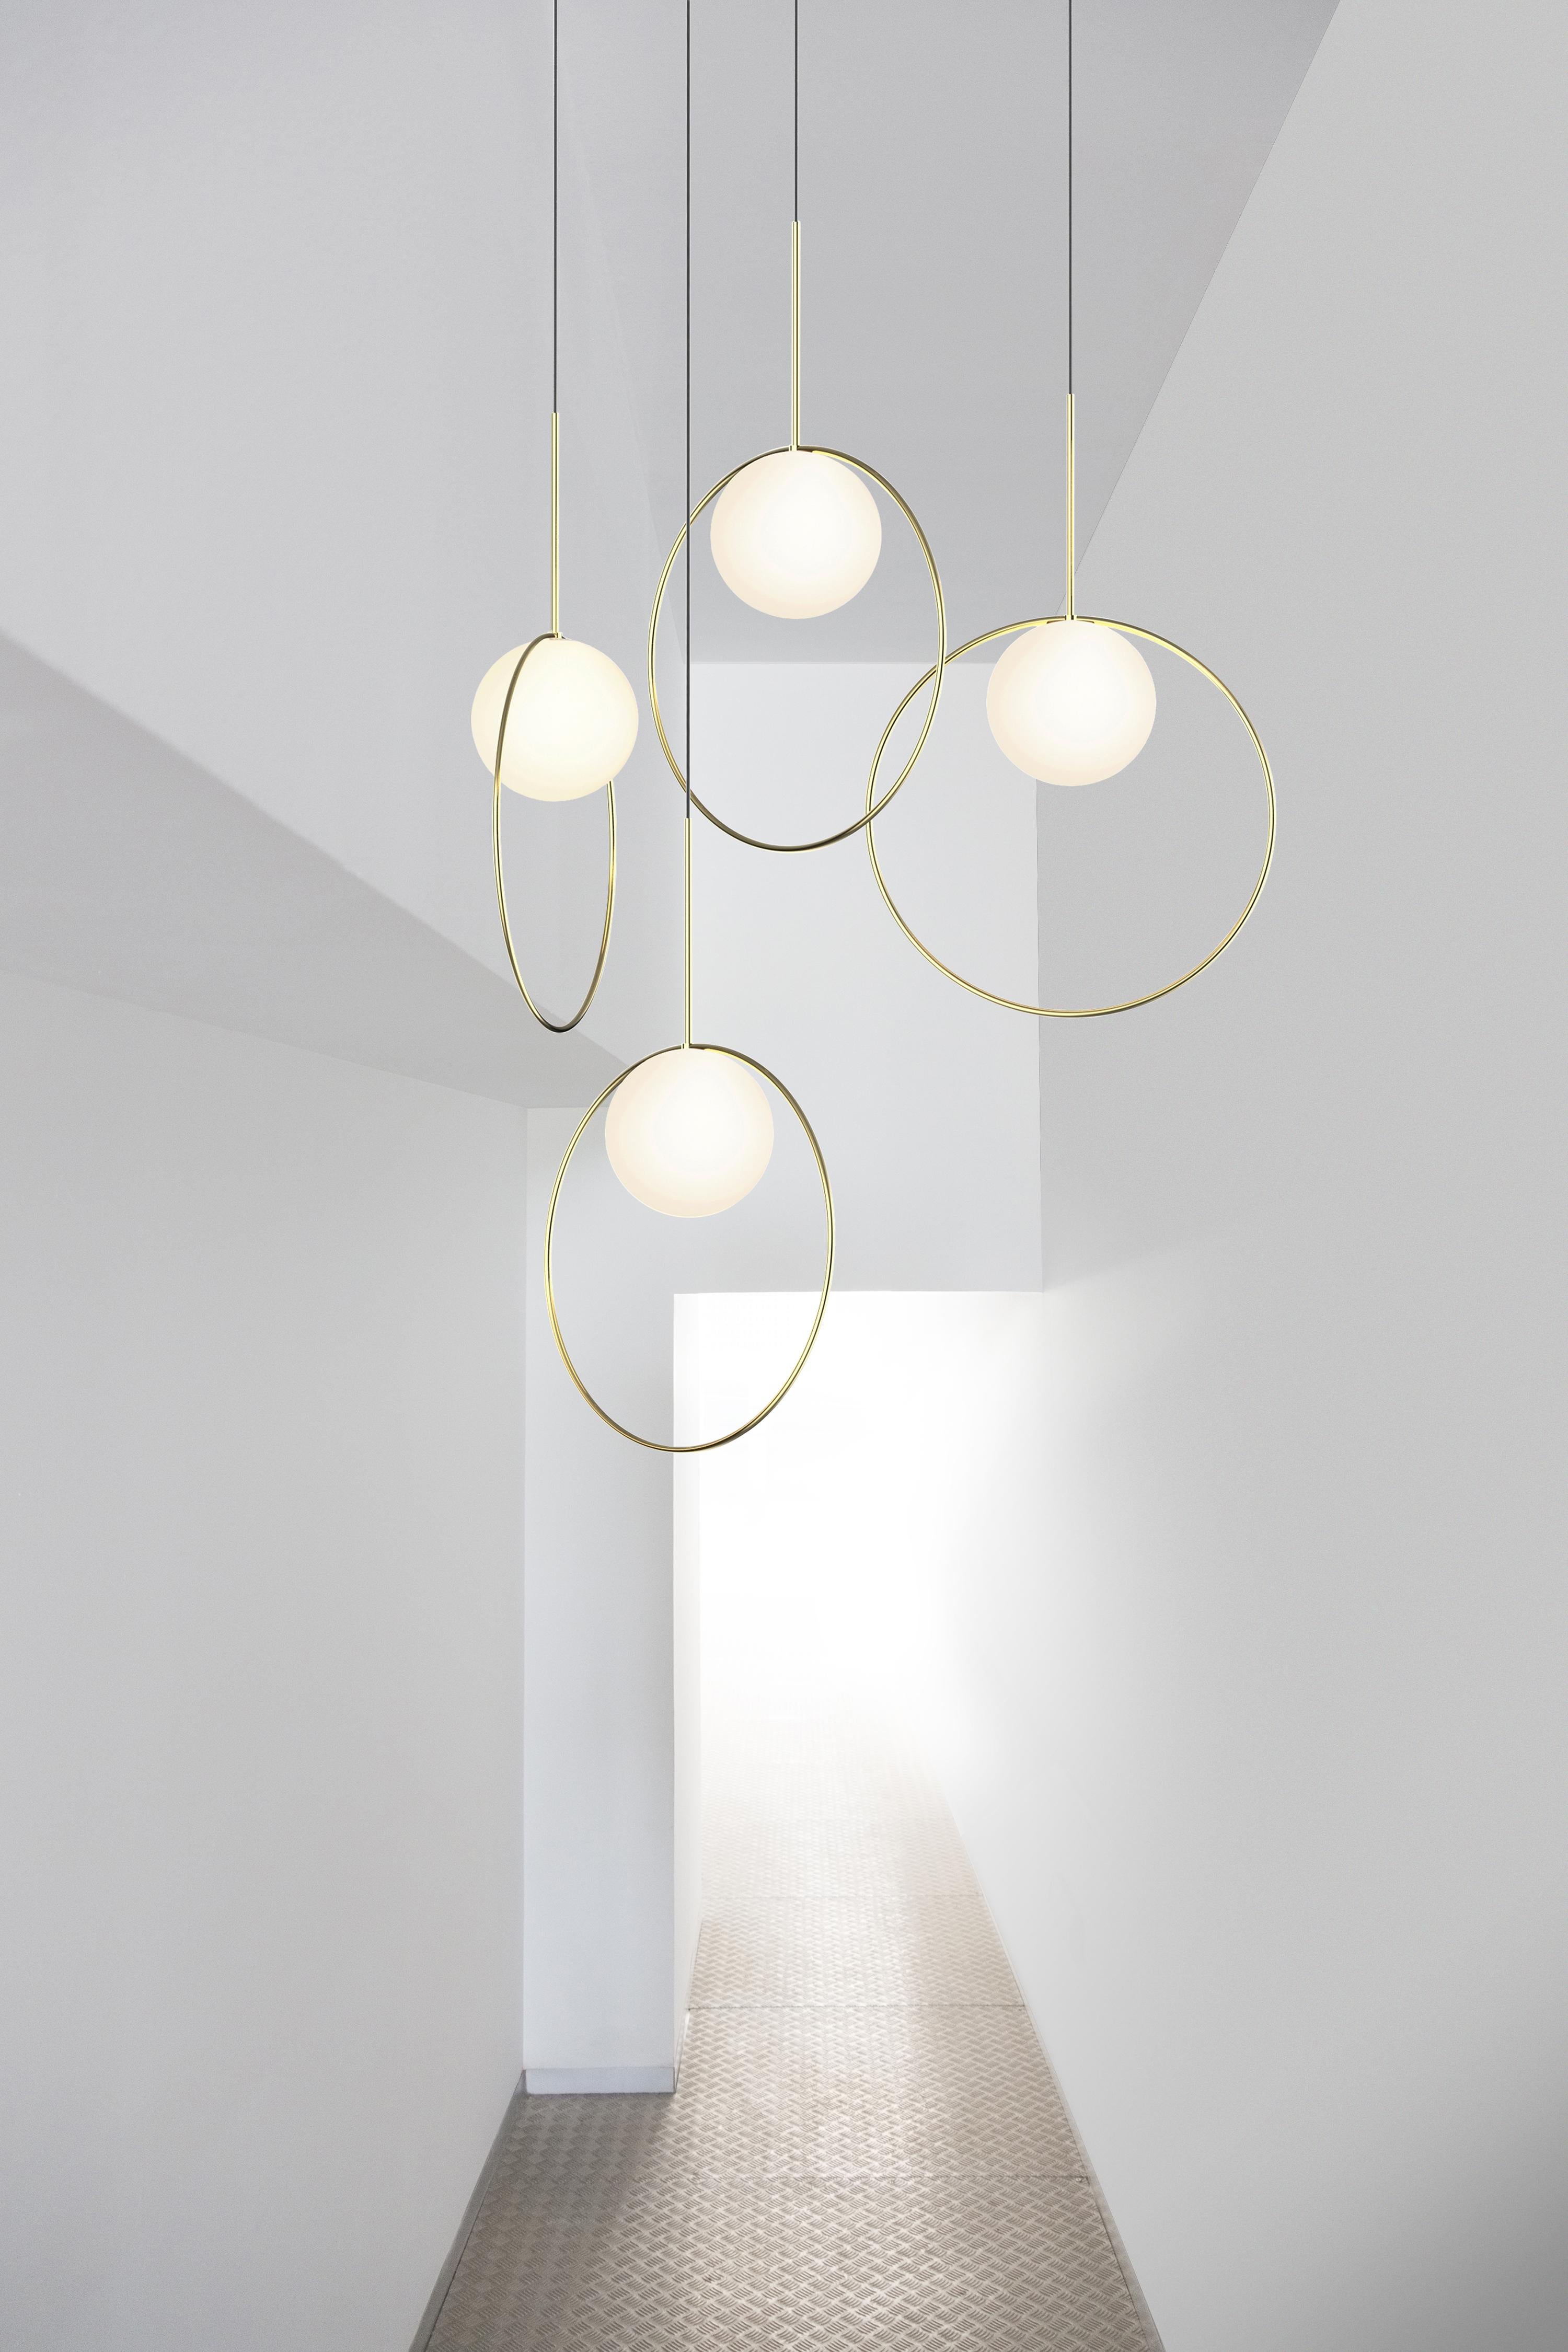 Taking its inspiration from pendant jewelry, Bola Halo is a uniquely expressive pendant light featuring a chromated ring that balances delicately over its elegant opal glass shade while allowing its surroundings to shine through. Available in 3